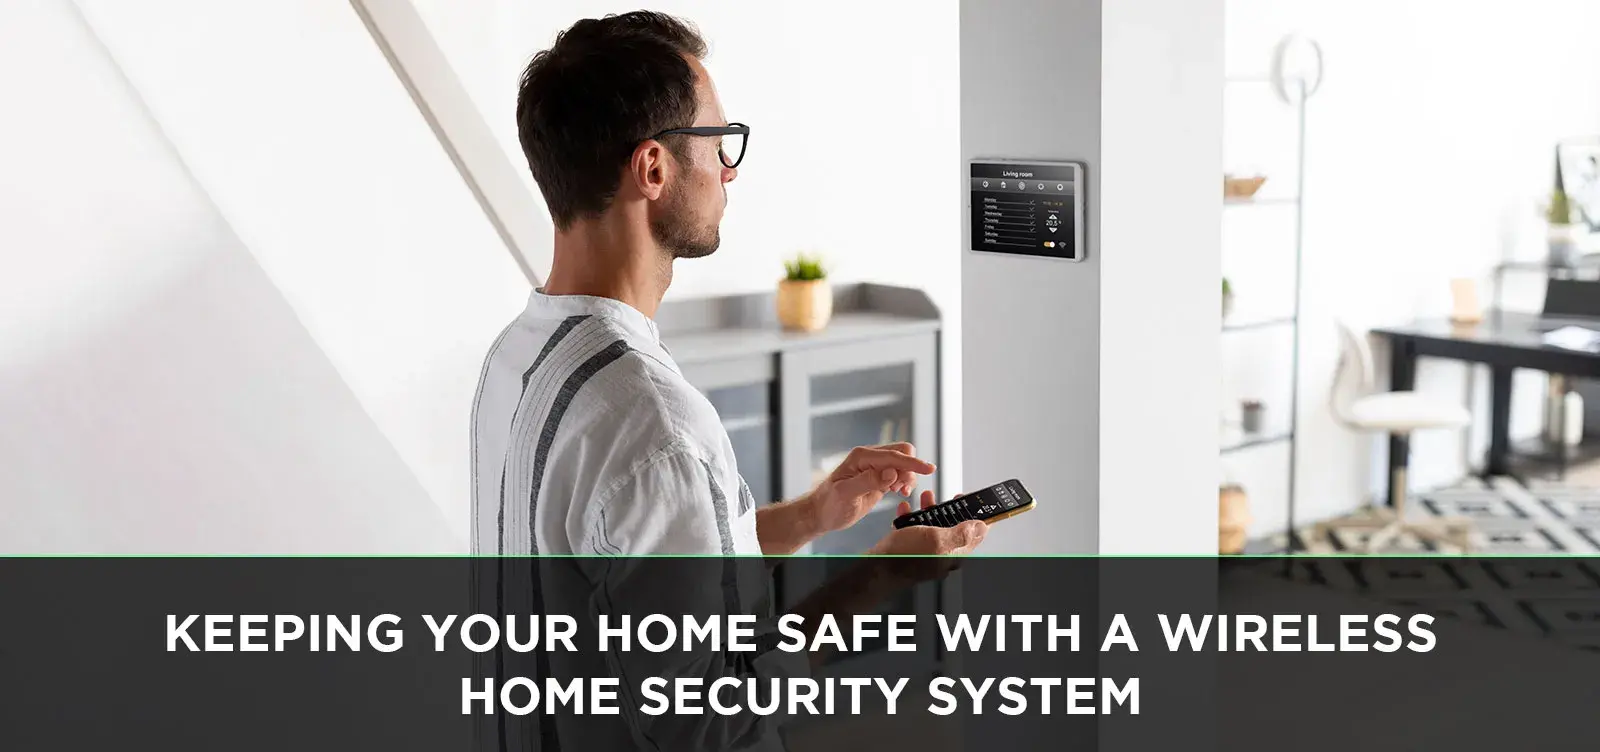 Keeping-Your-Home-Safe-With-a-Wireless-Home-Security-System